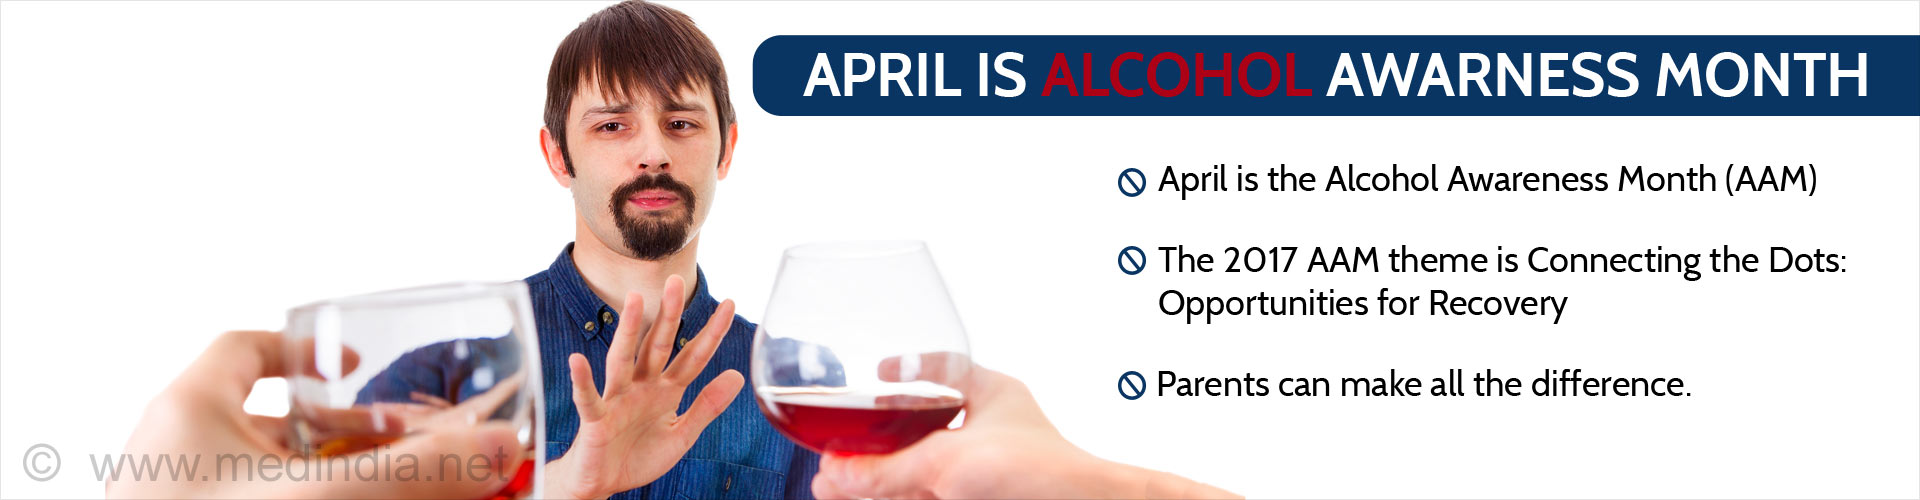 April is Alcohol Awareness Month
- April is the Alcohol Awareness Month (AAM)
- The 2017 AAM theme is 